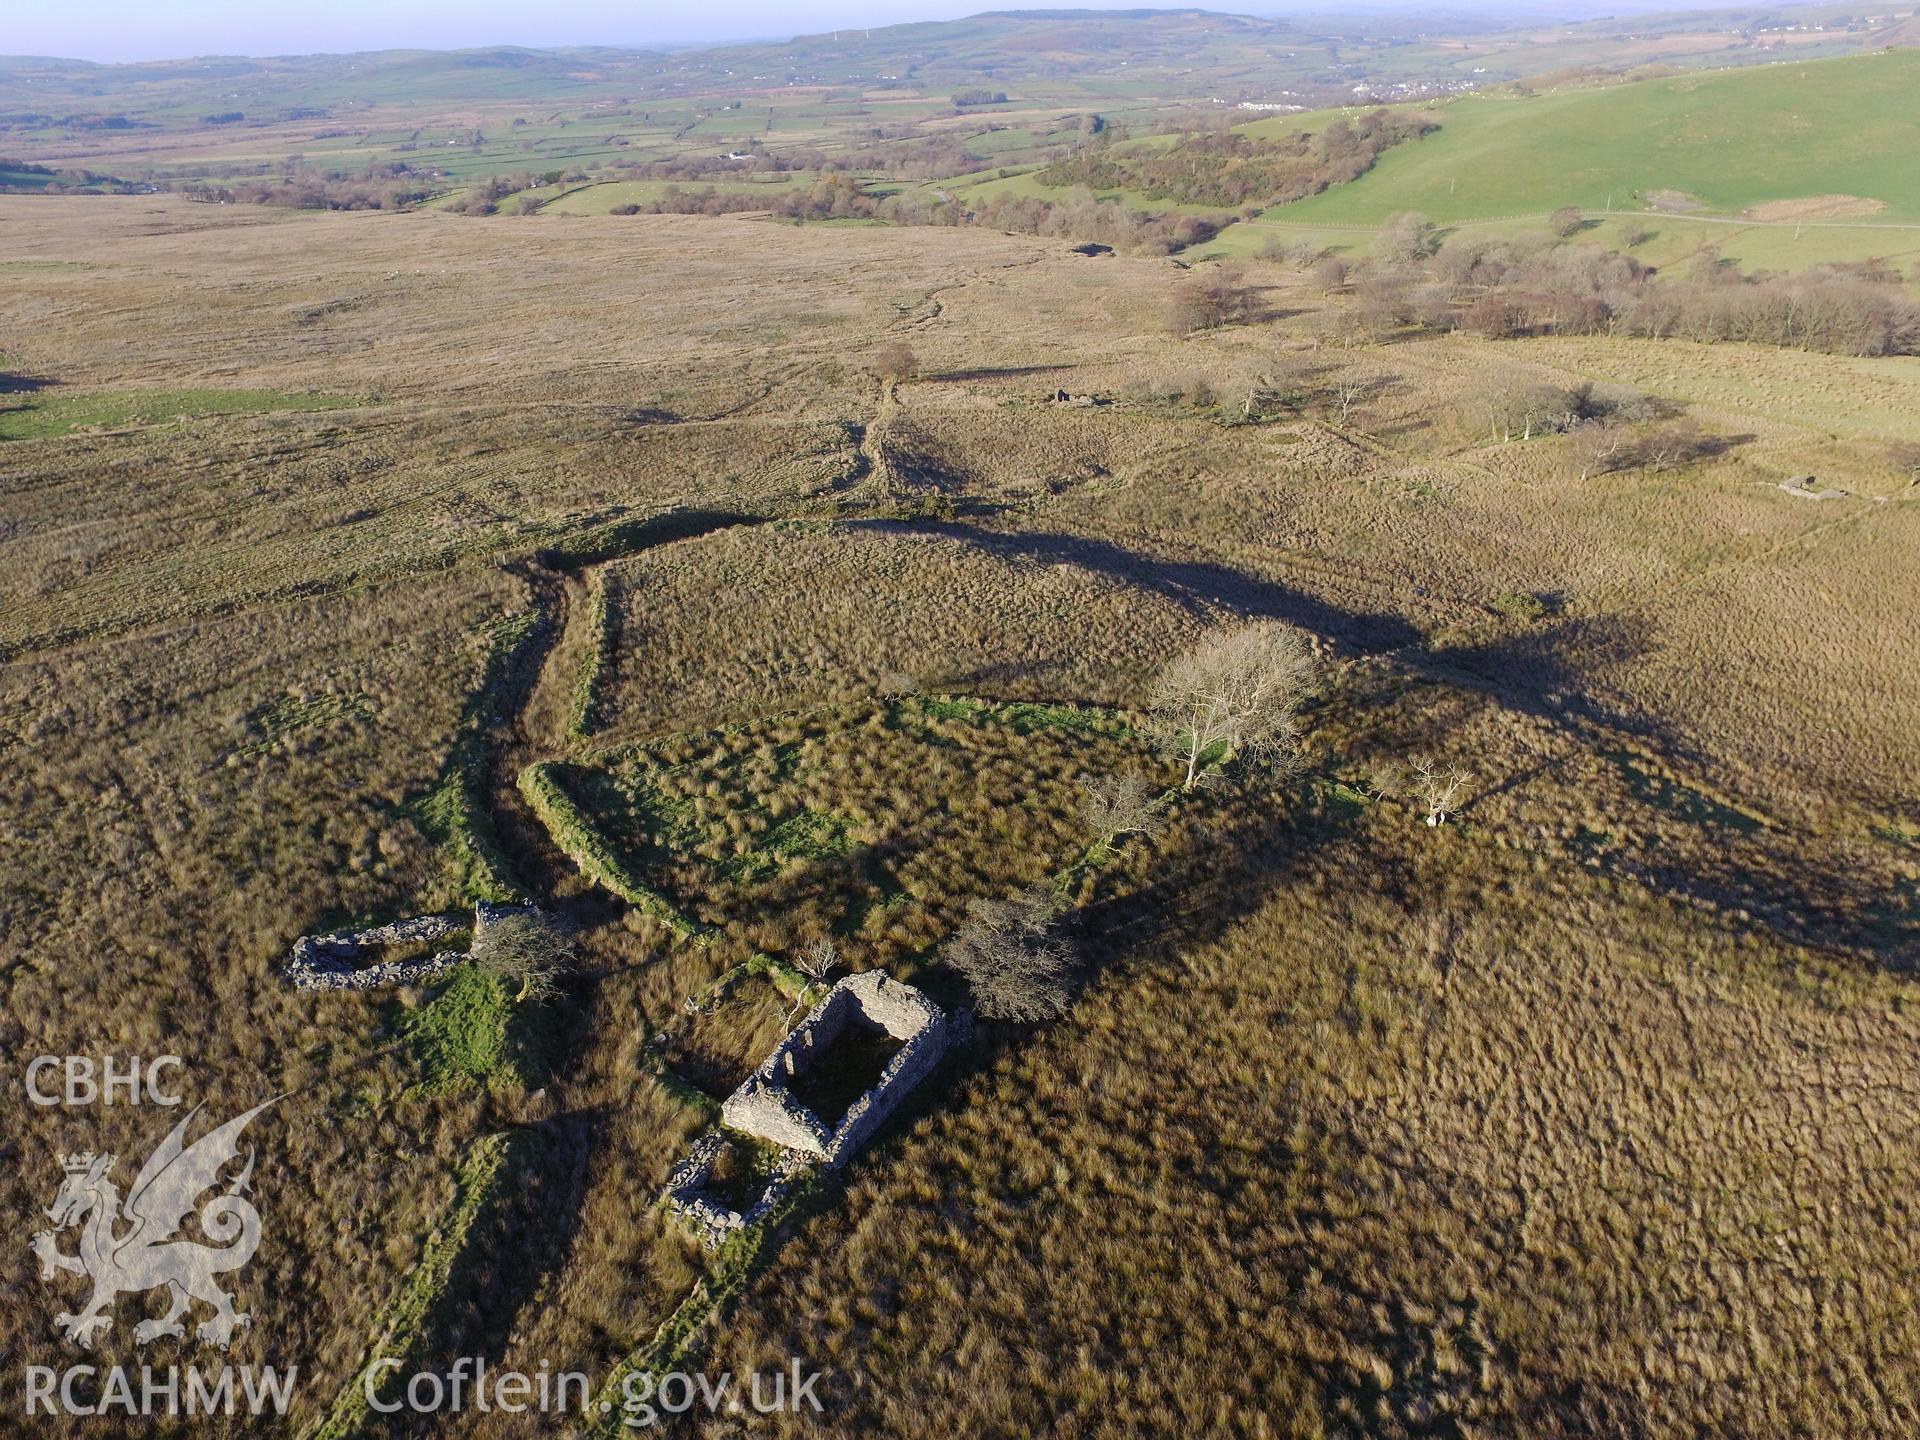 Aerial view of the remains of Tynewydd stone cottage and the ruined drystone outbuilding to the west, south west of Bryneithinog farm, Ystrad Fflur. Colour photograph taken by Paul R. Davis on 18th November 2018.